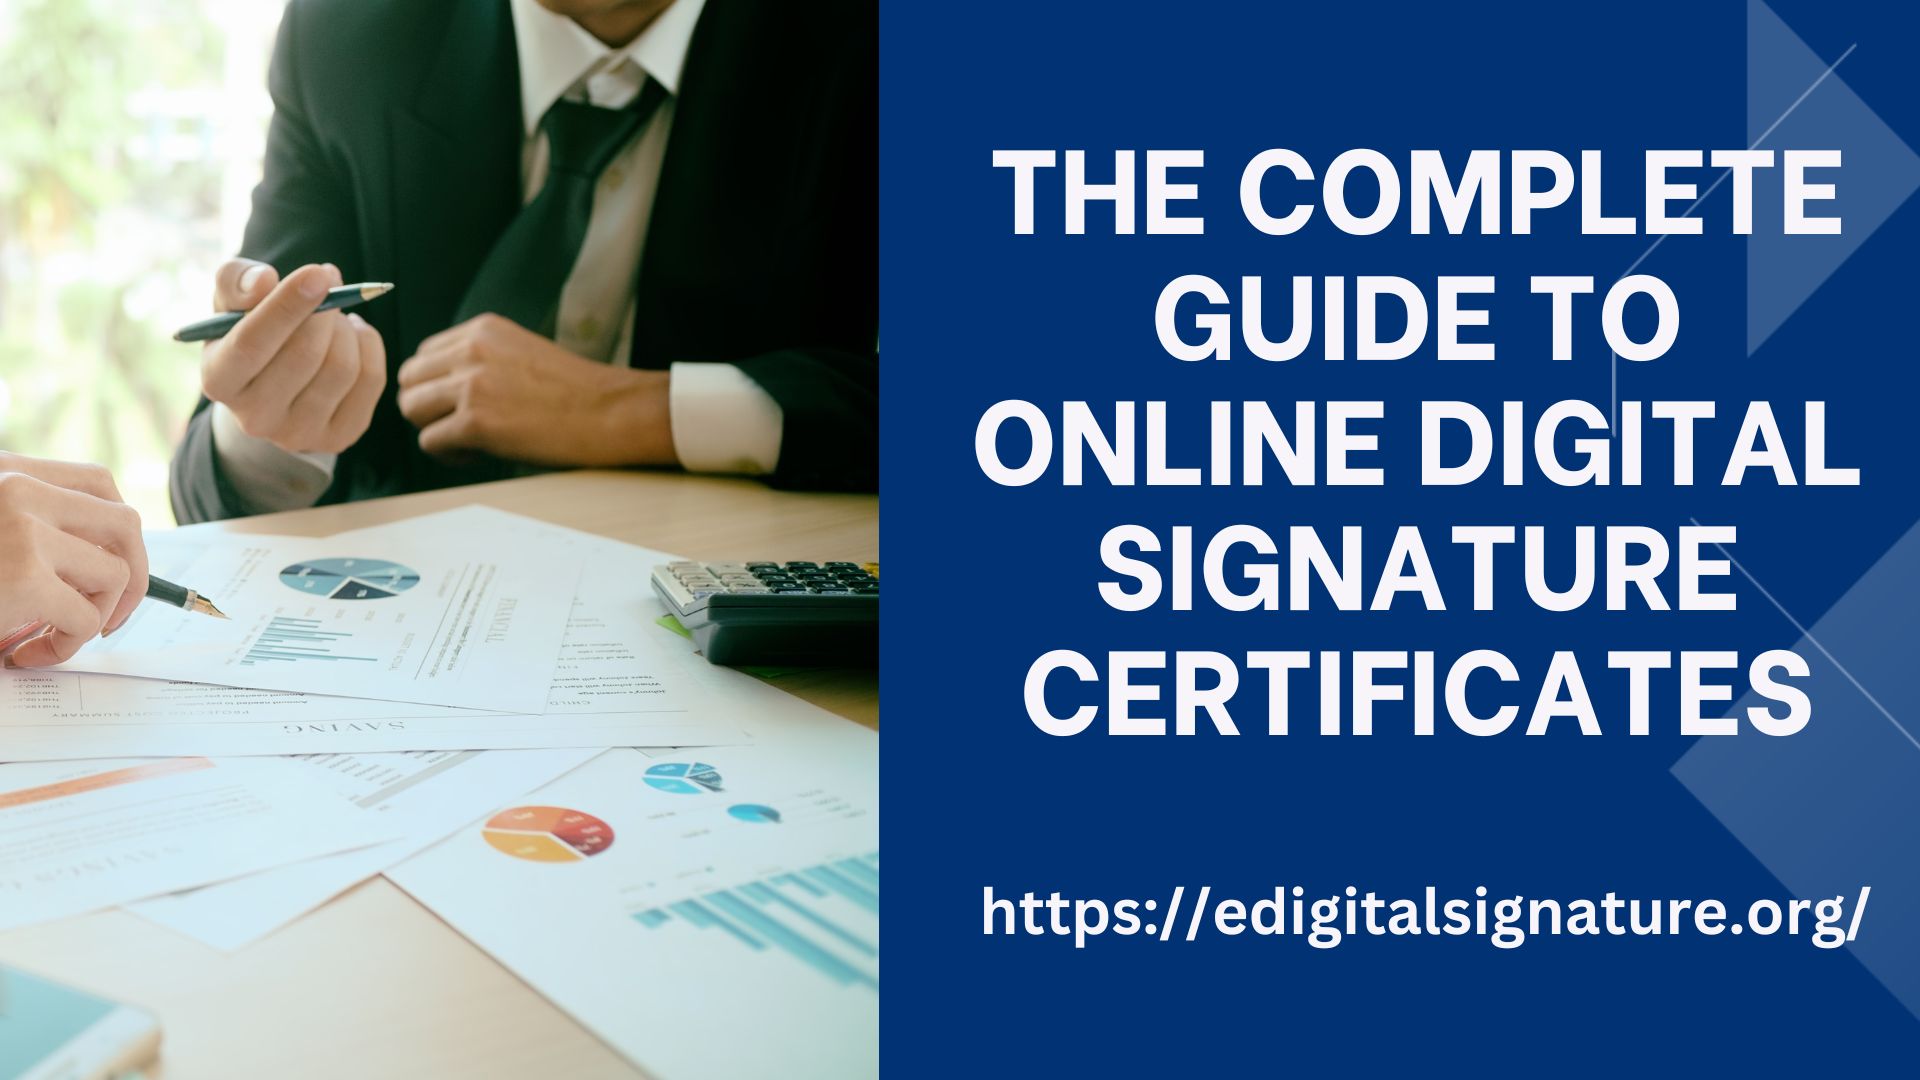 The Complete Guide to Online Digital Signature Certificates